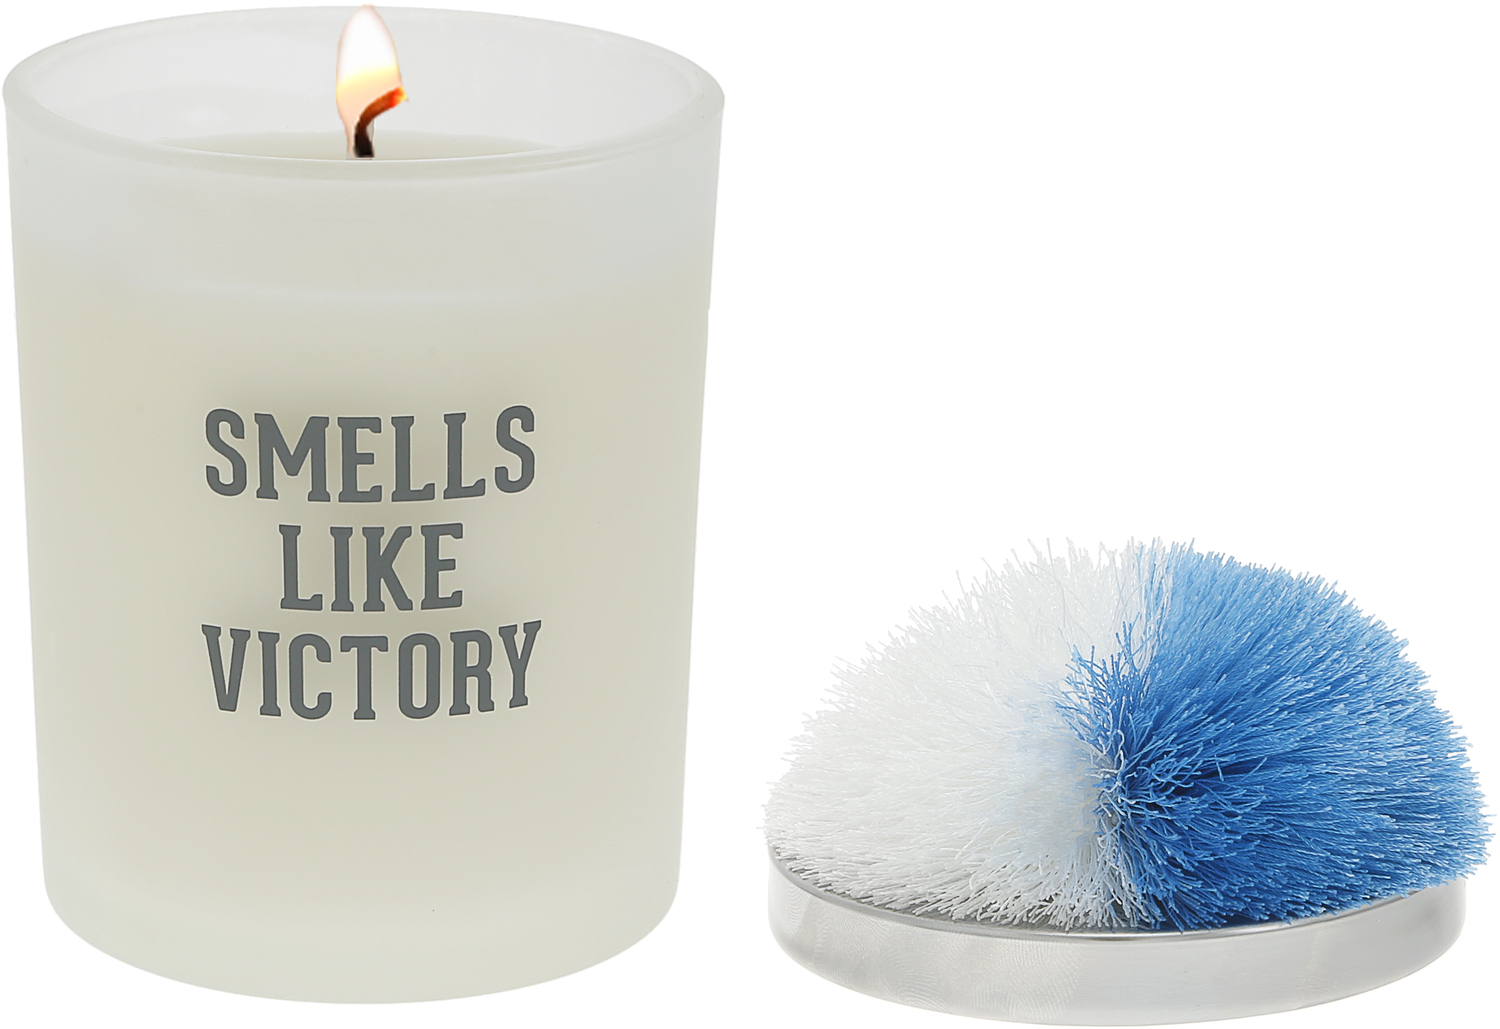 Victory - Light Blue & White by Repre-Scent - Victory - Light Blue & White - 5.5 oz - 100% Soy Wax Candle with Pom Pom Lid
Scent: Tranquility